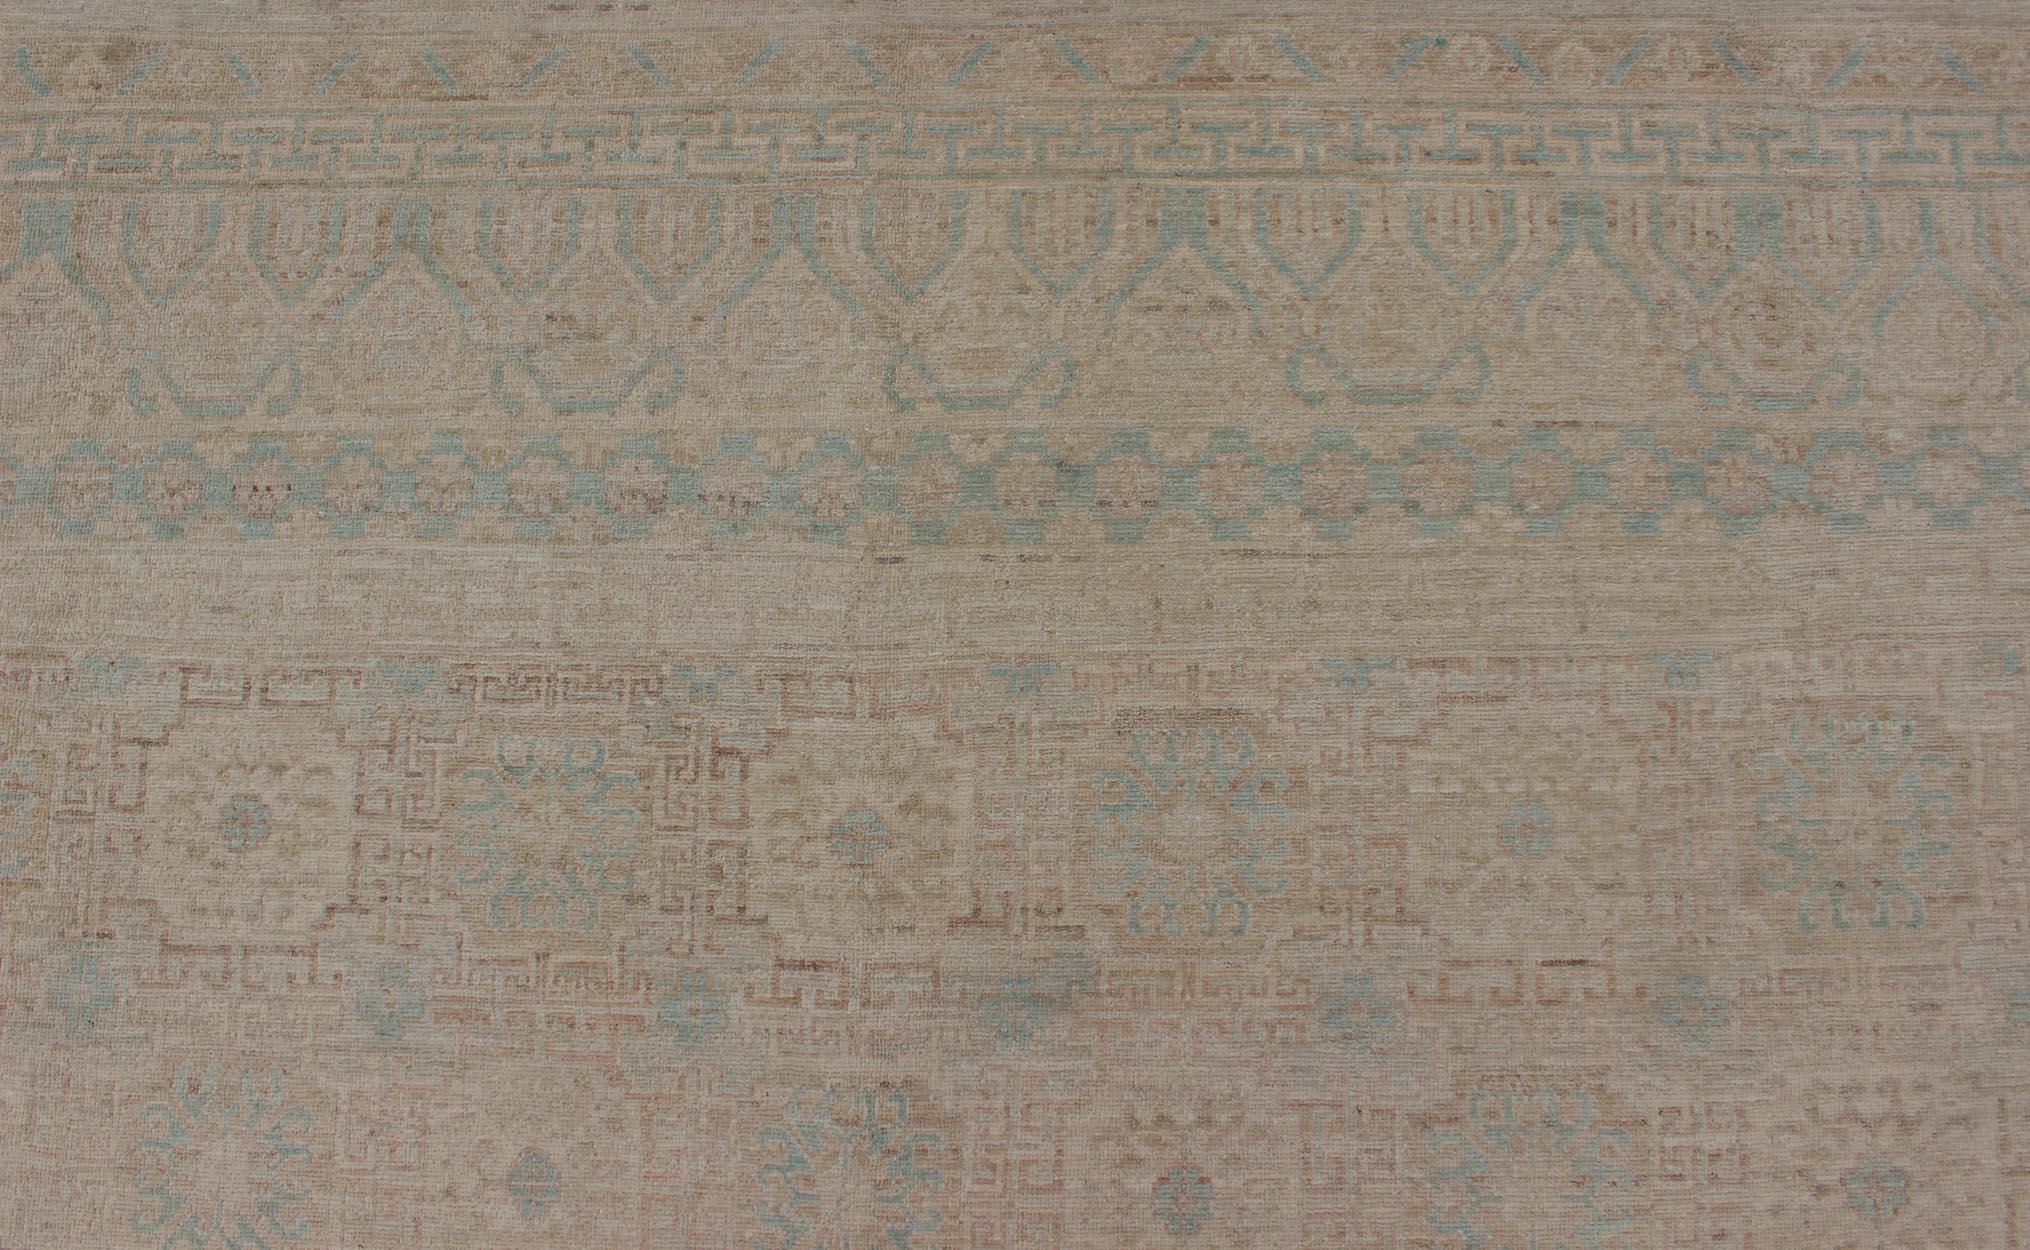 Khotan Design Rug with Geometric Medallions in Tan and Turquoise For Sale 2